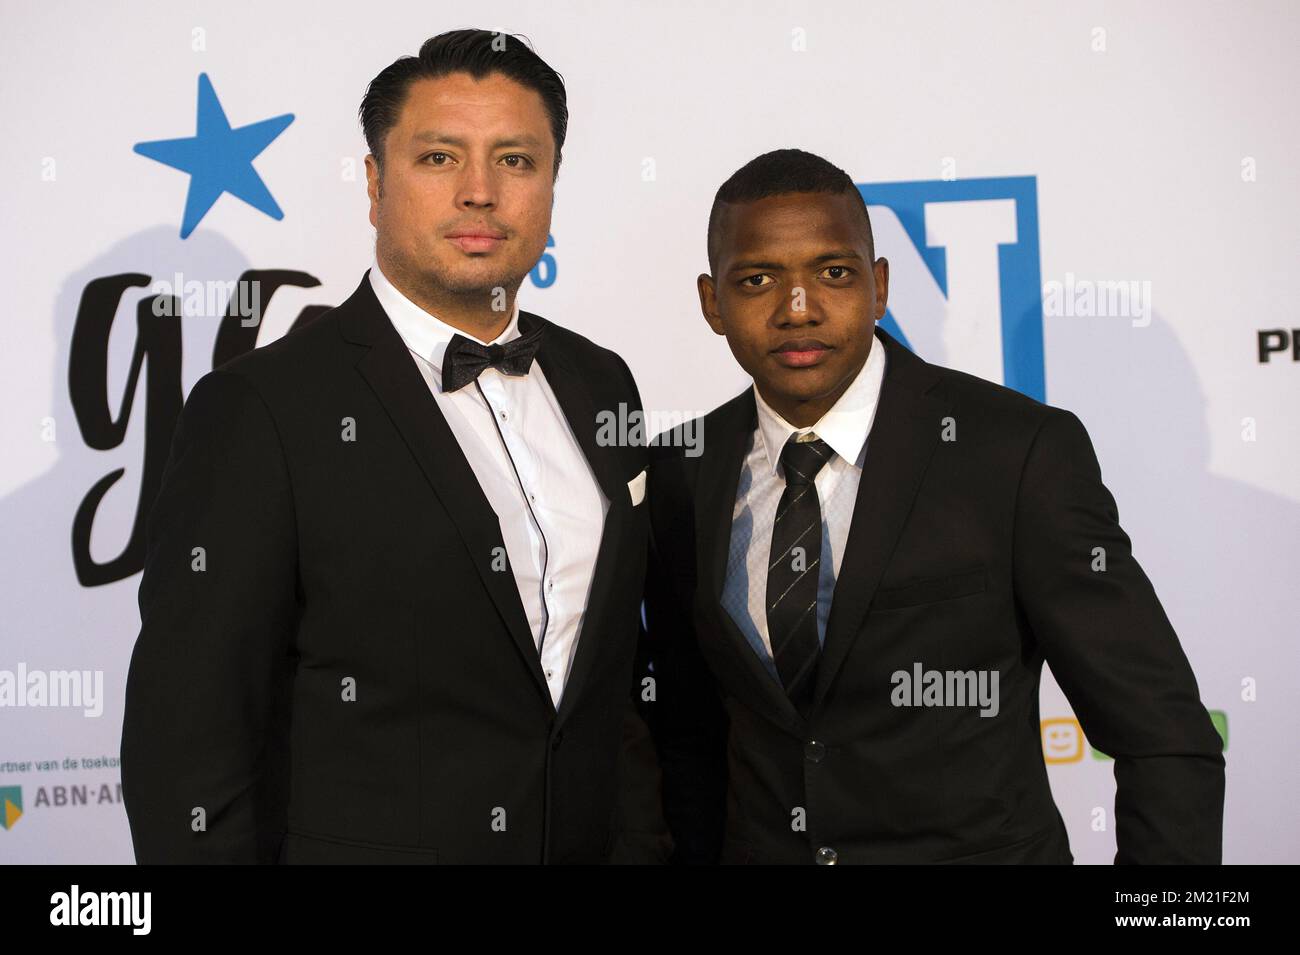 Leonardo and Club's Jose Izquierdo pictured during the first edition of the Professional Soccer Player of the Year 2016 gala evening, Monday 23 May 2016, in Gent.  Stock Photo